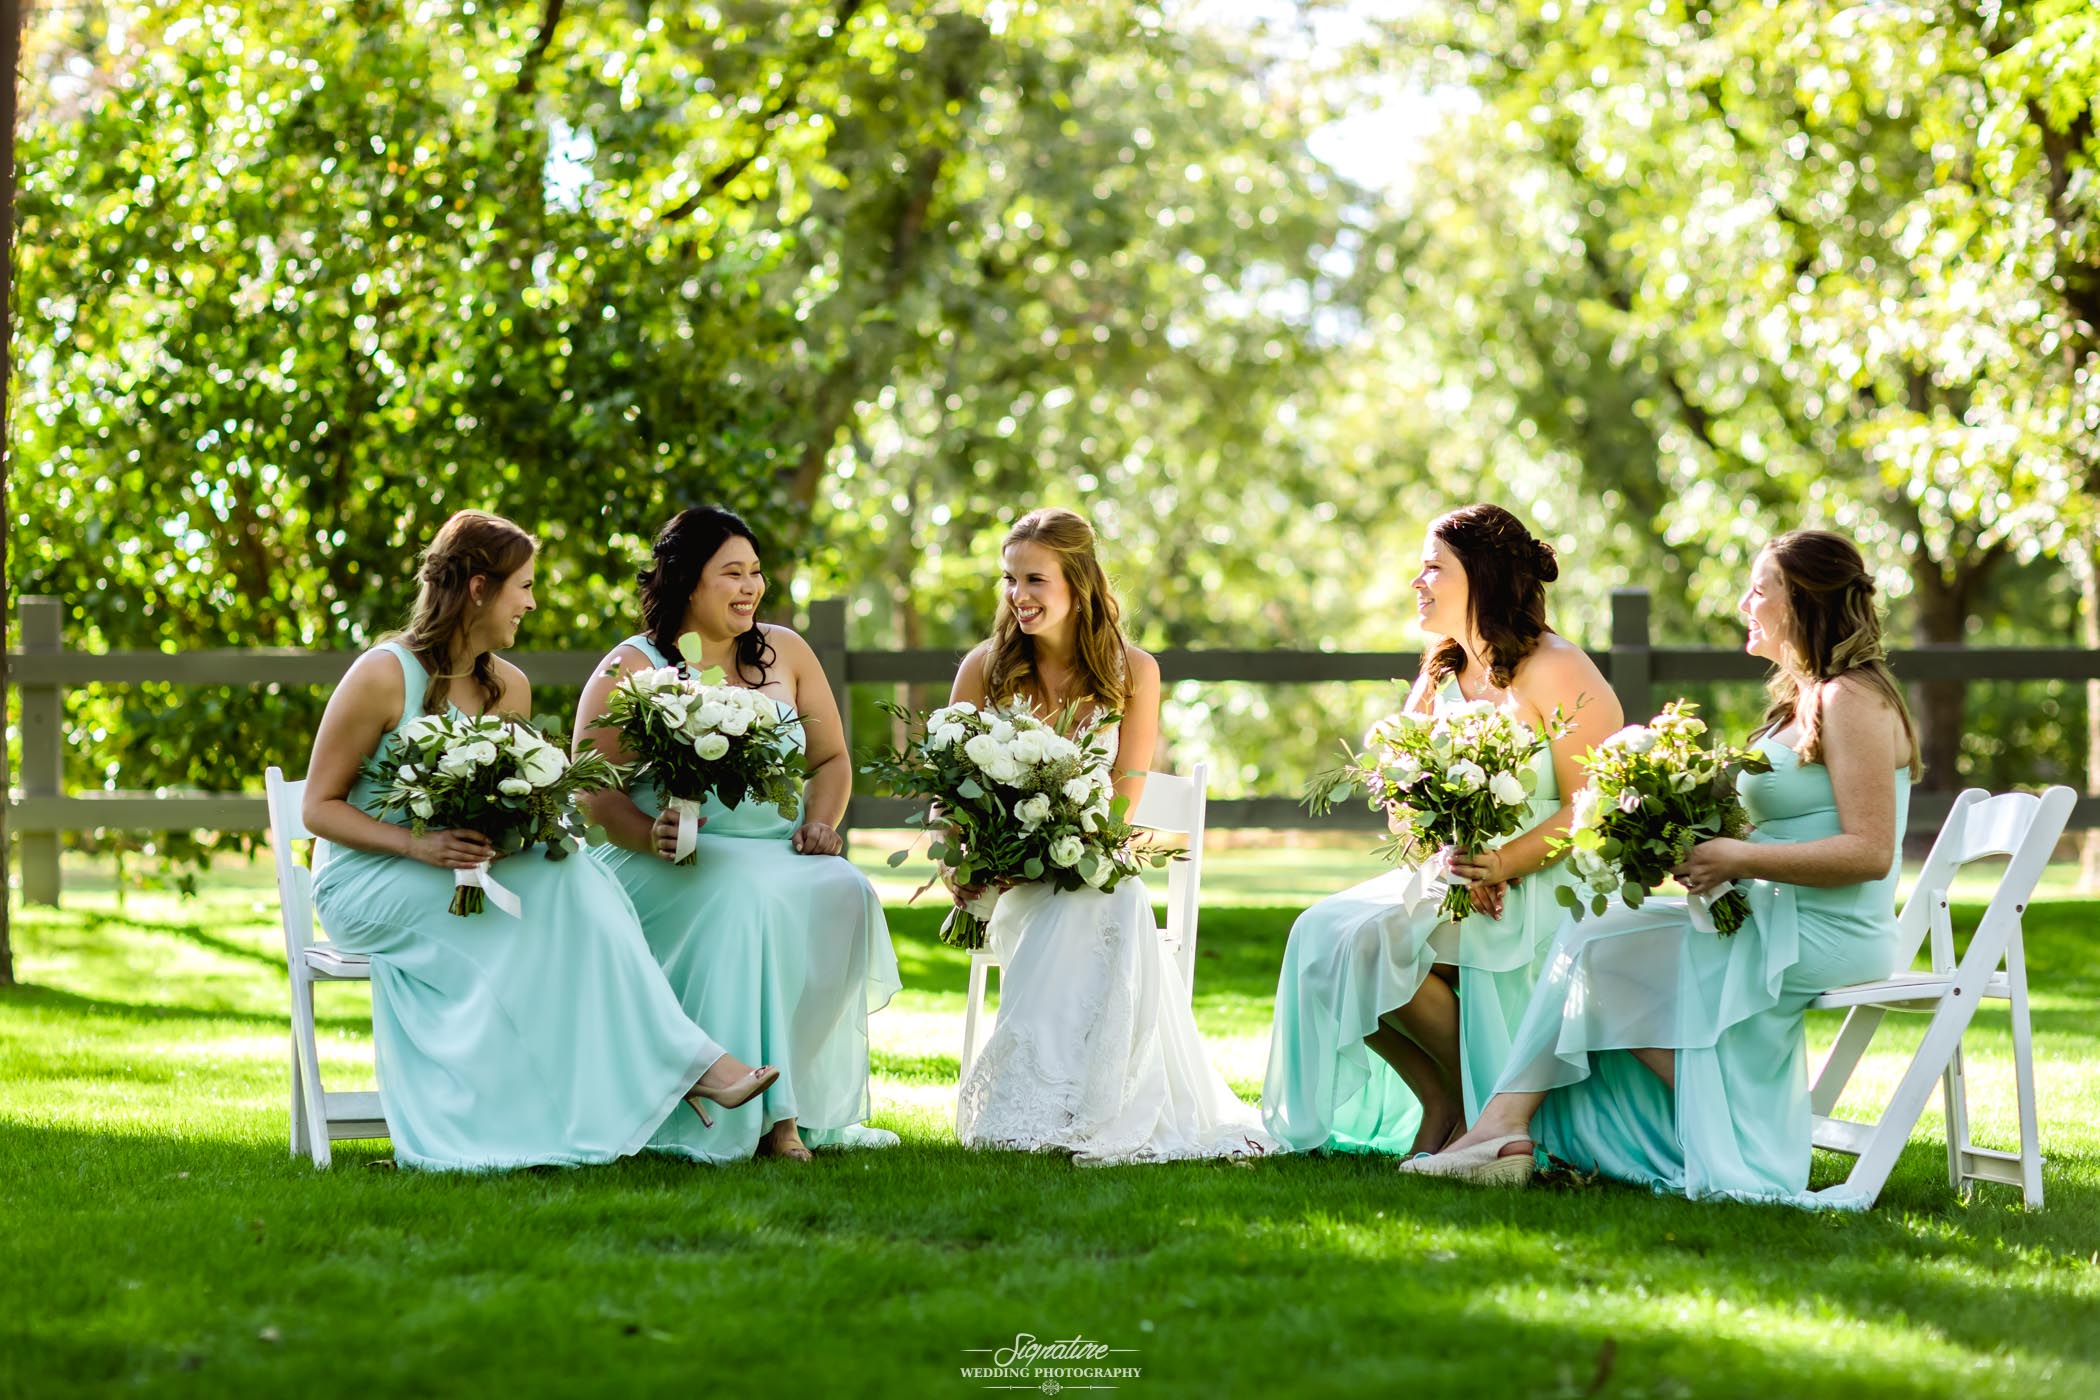 Bride and bridesmaids sitting on chairs outside smiling